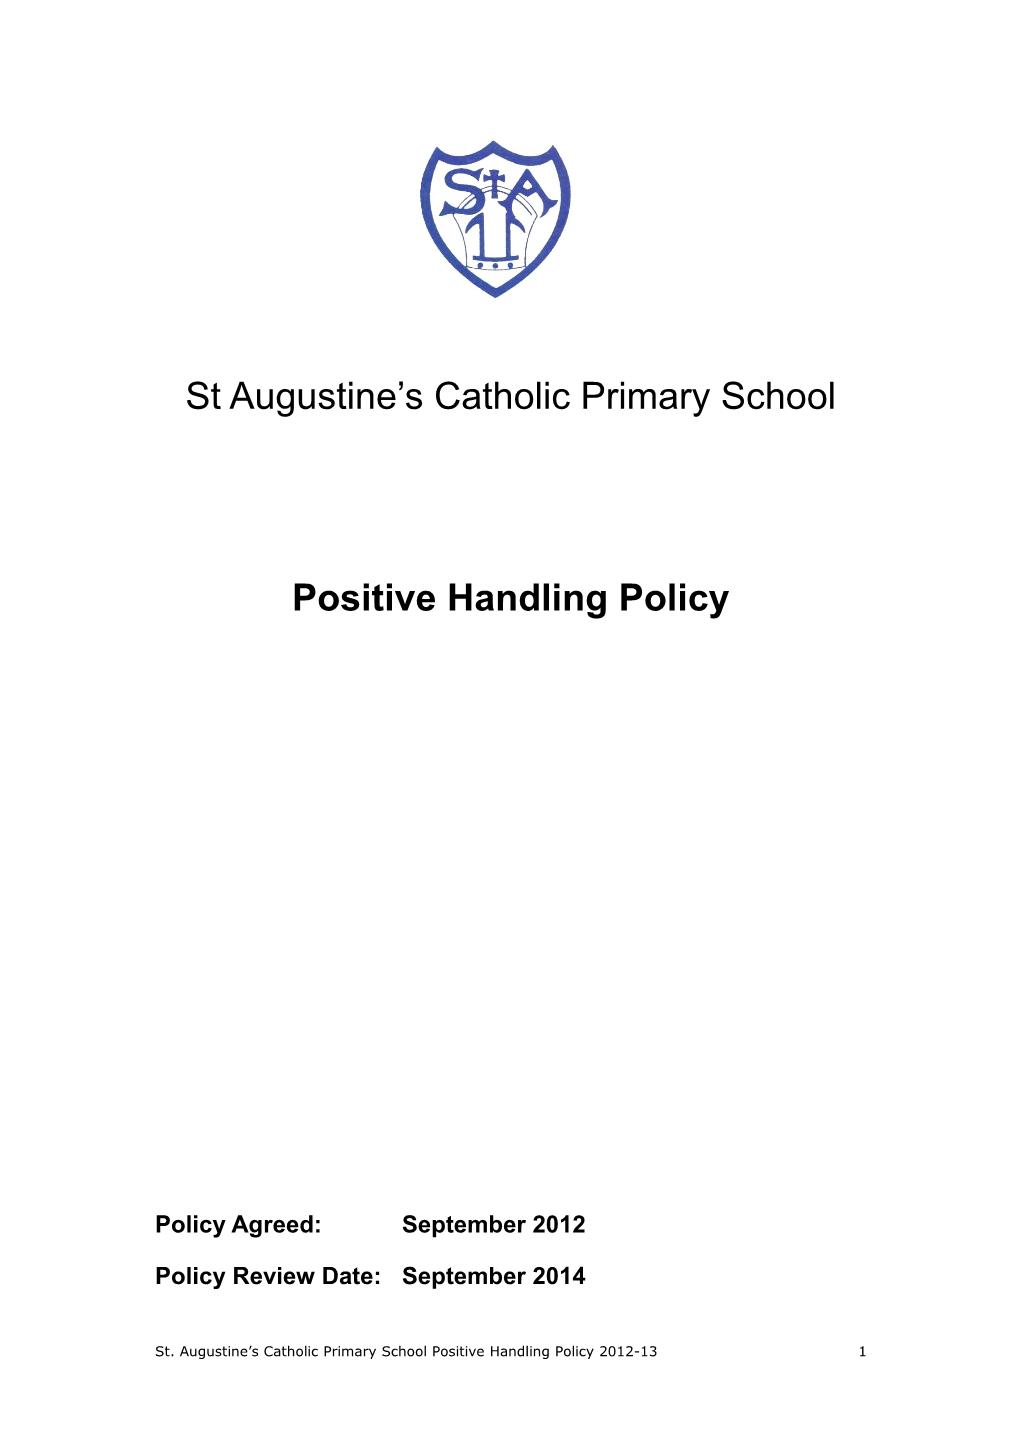 Positive Handling Policy